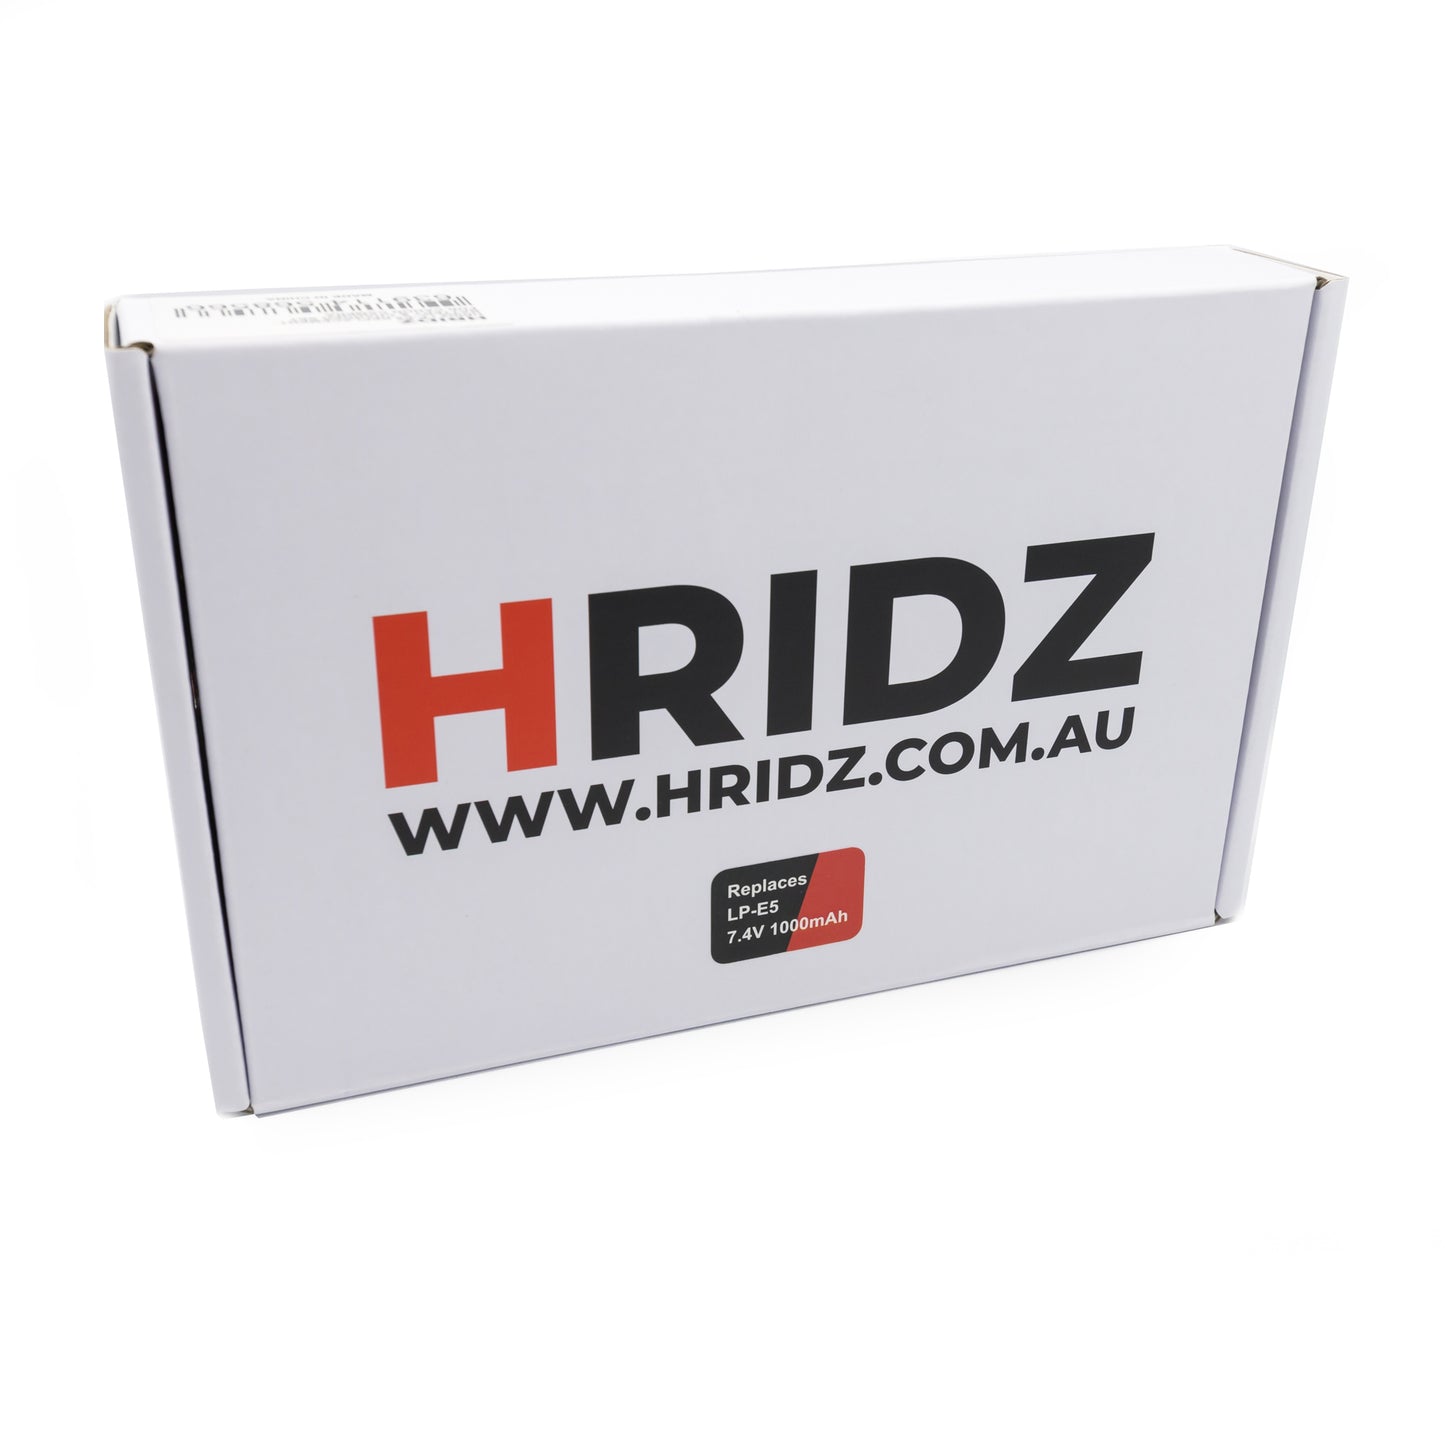 Hridz LP-E5 Battery Charger for Canon EOS Rebel and Kiss Cameras